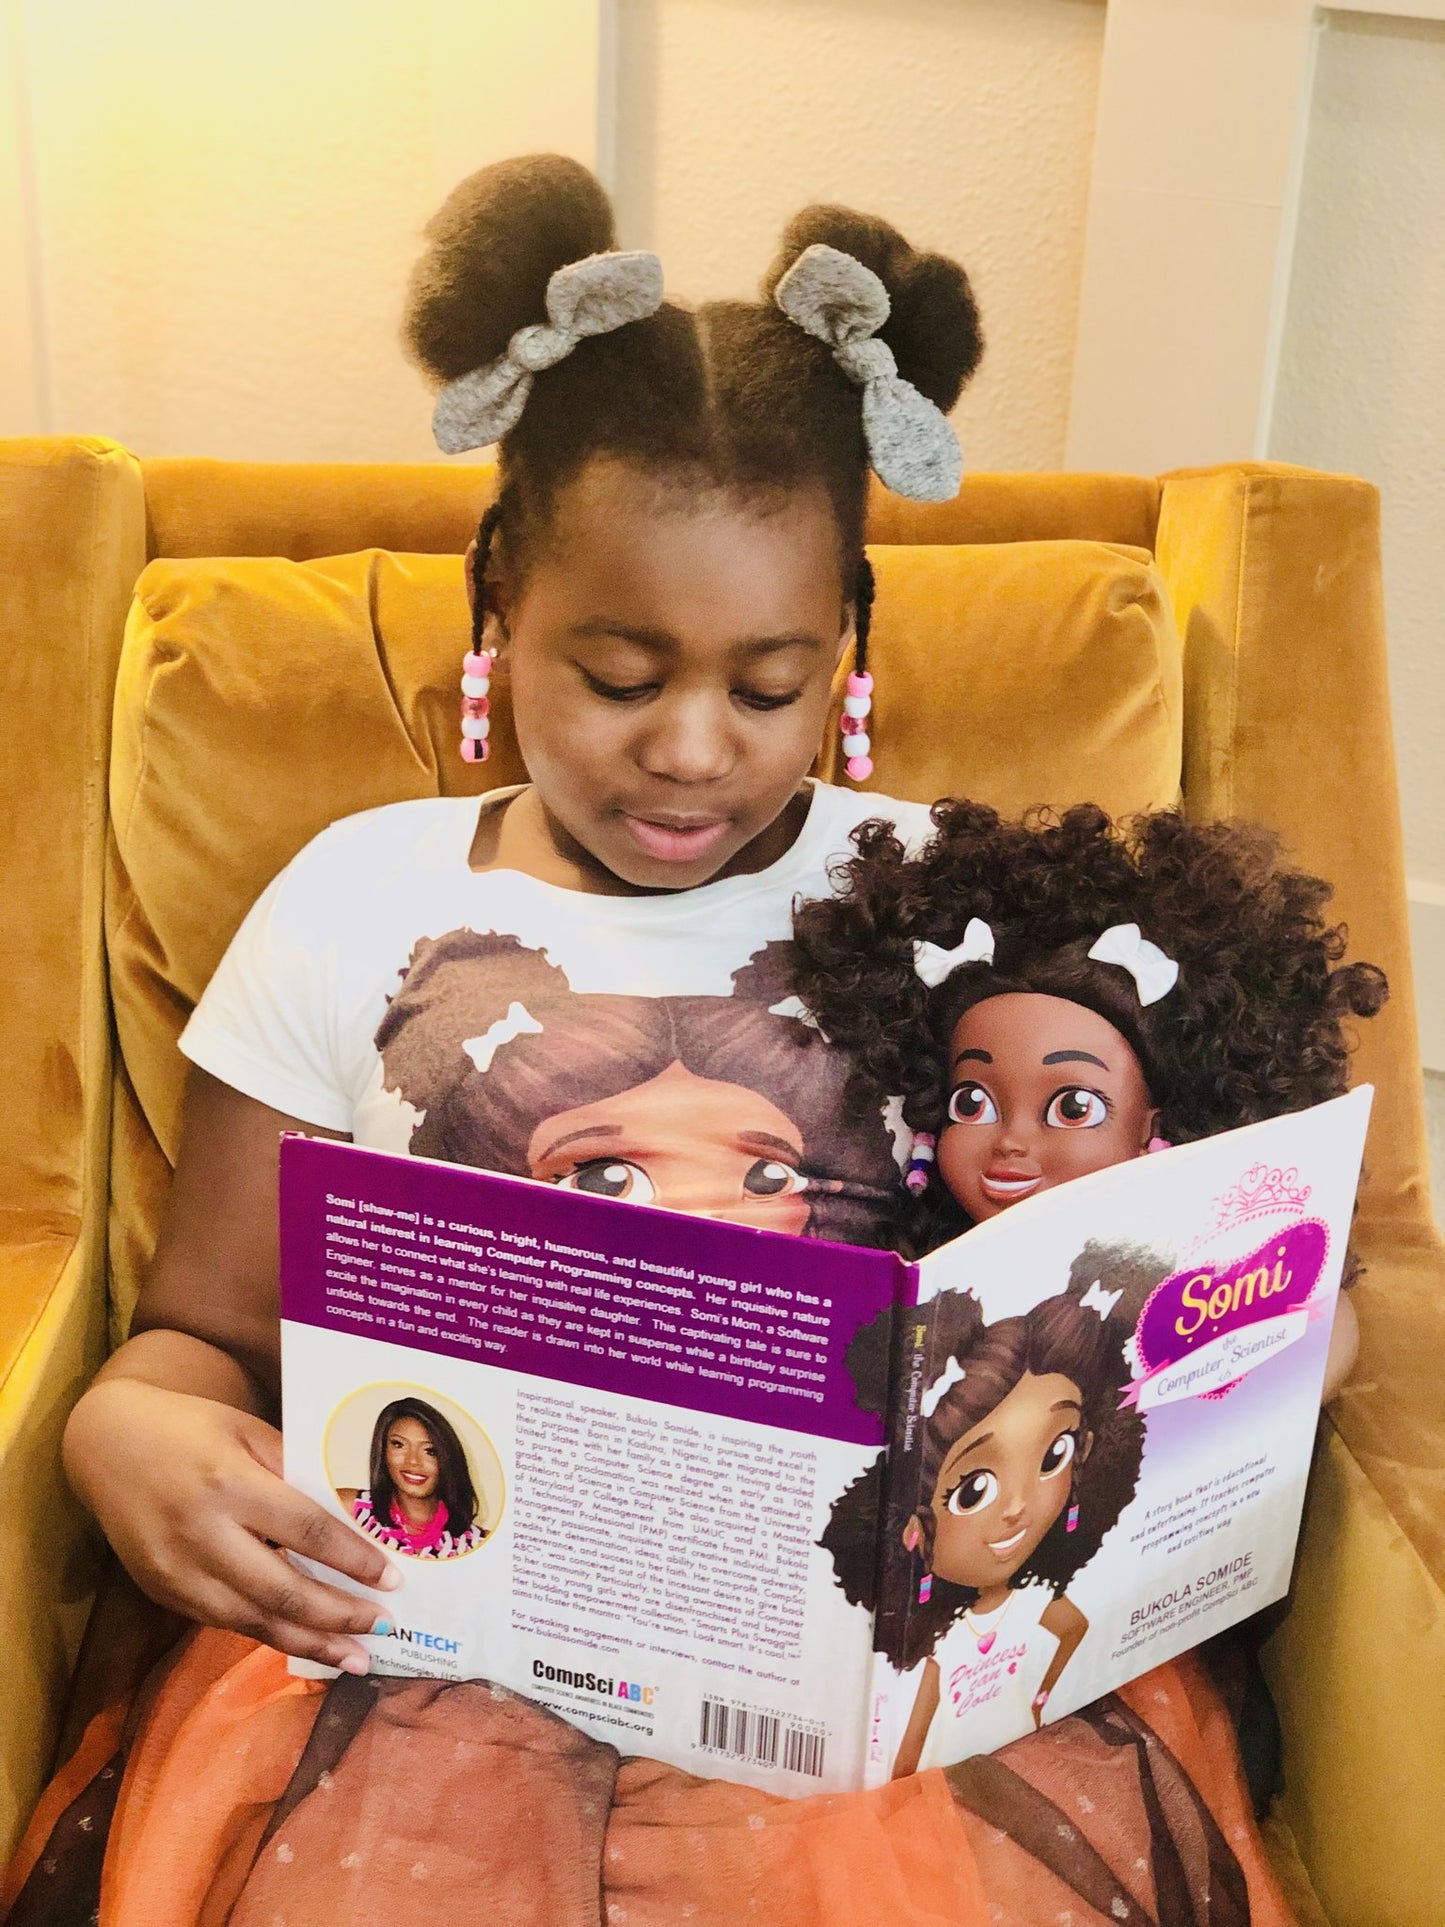 Somi the Computer Scientist : Princess can Code storybook (softcover)